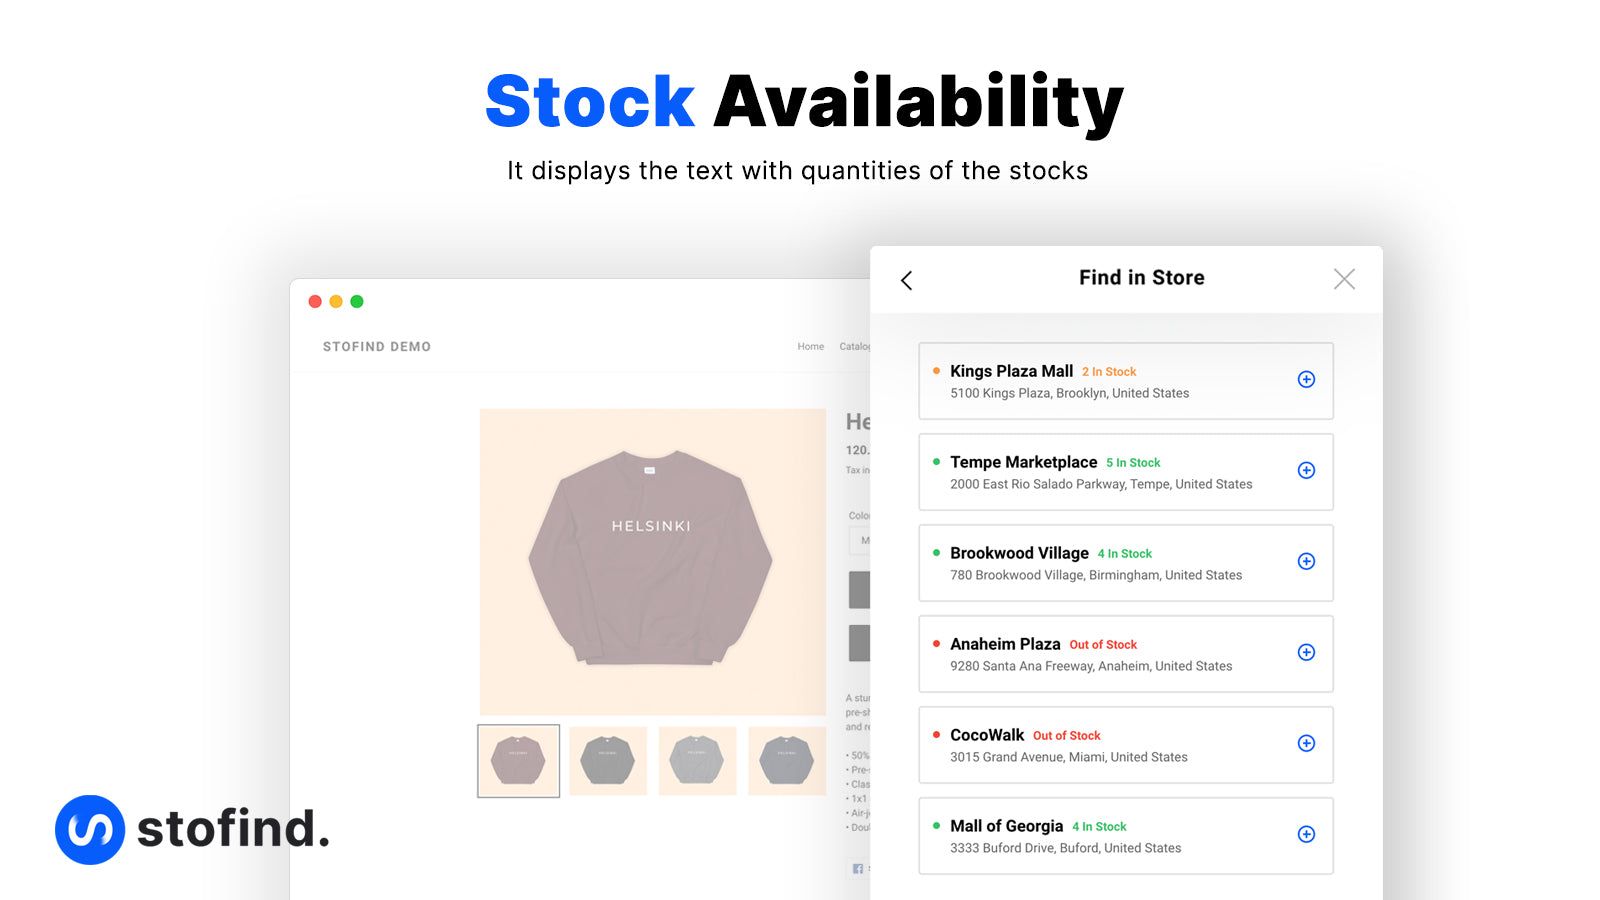  Stock availability with the quantity of the stock